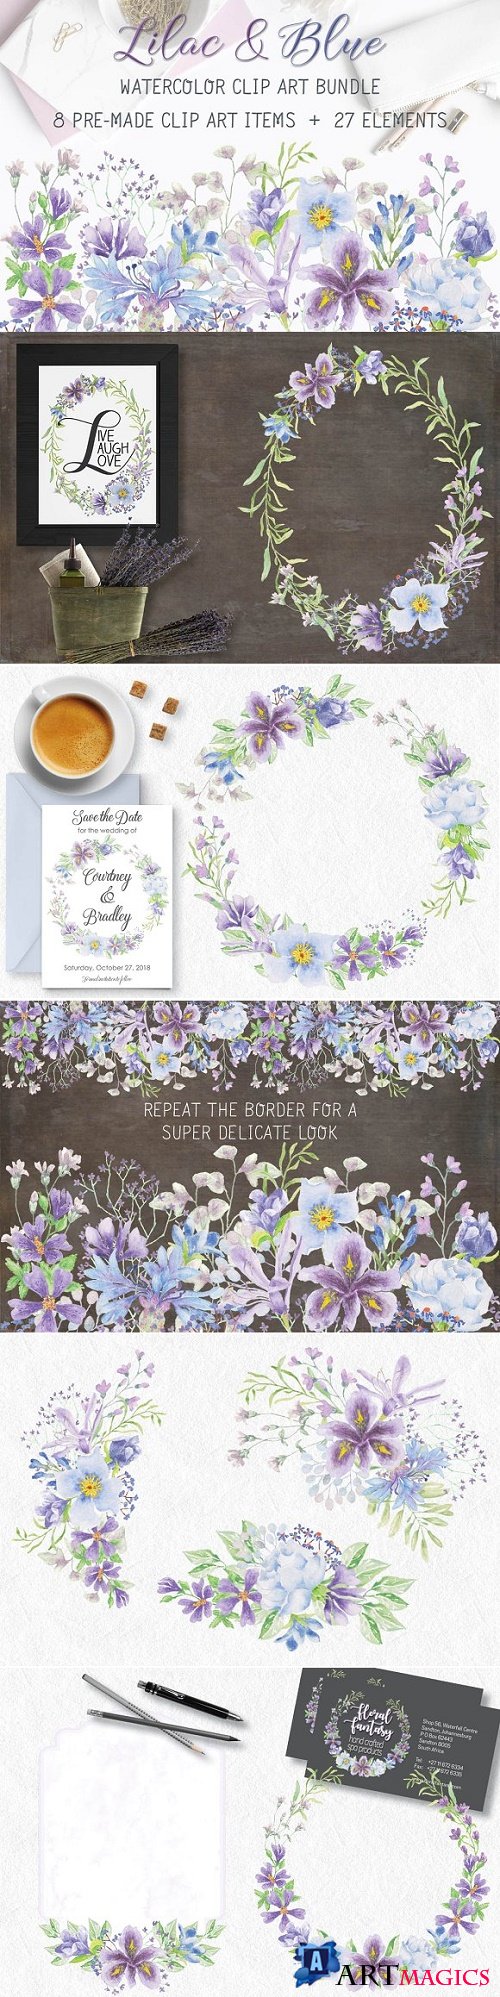 Lilac and blue watercolor bundle 2493877